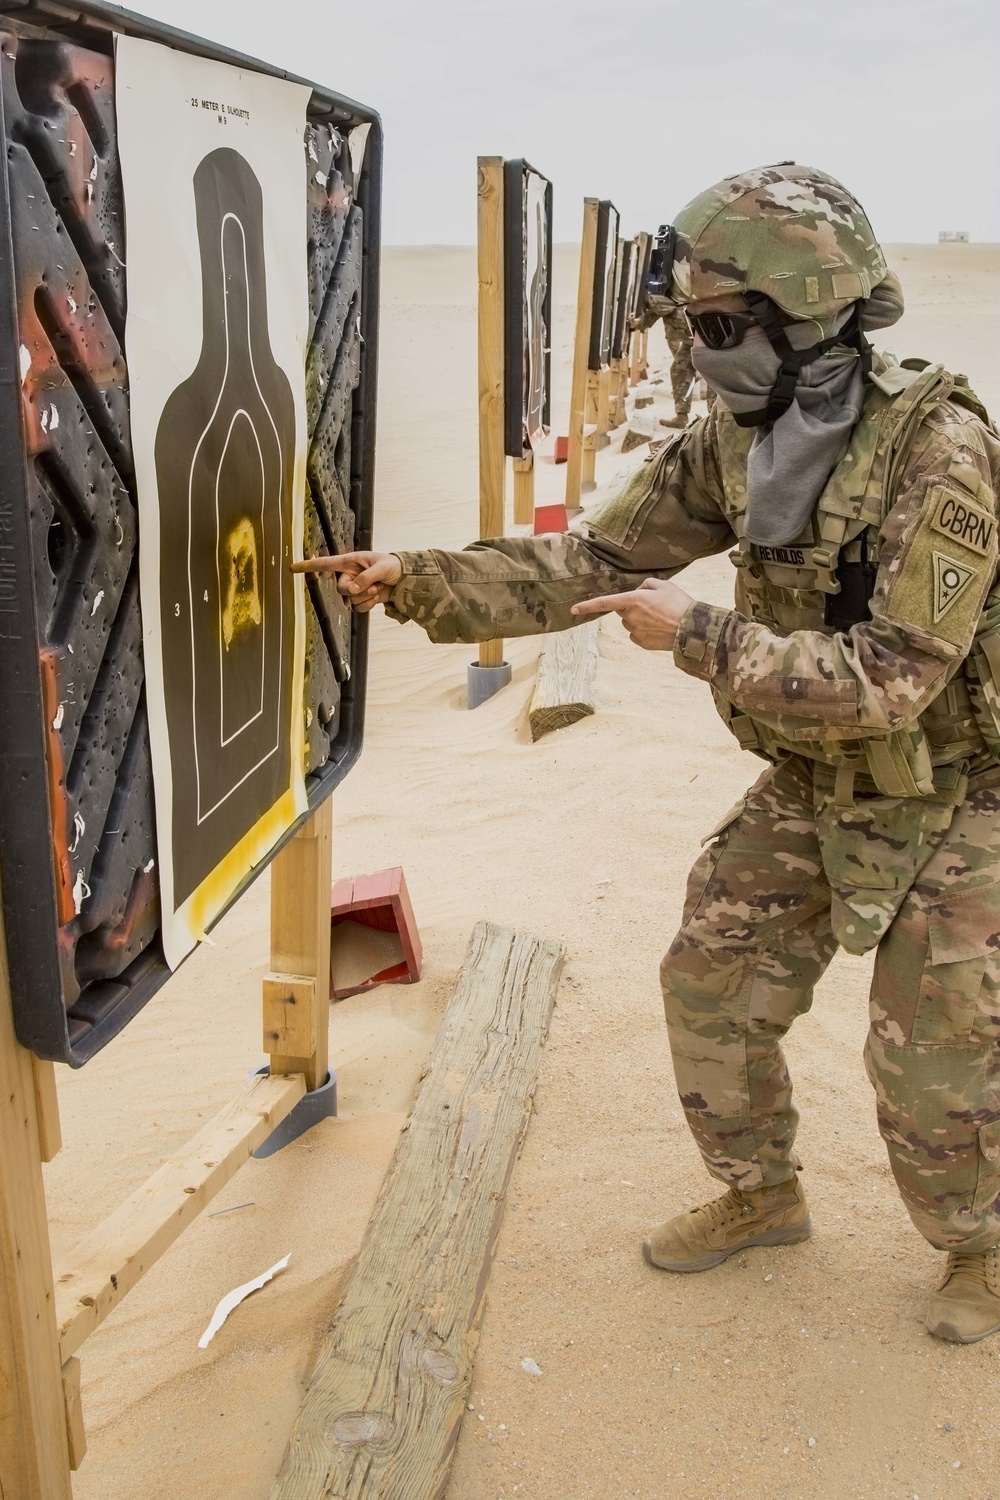 Go for Gold: Service Members Shoot on Udairi Range for GAFB